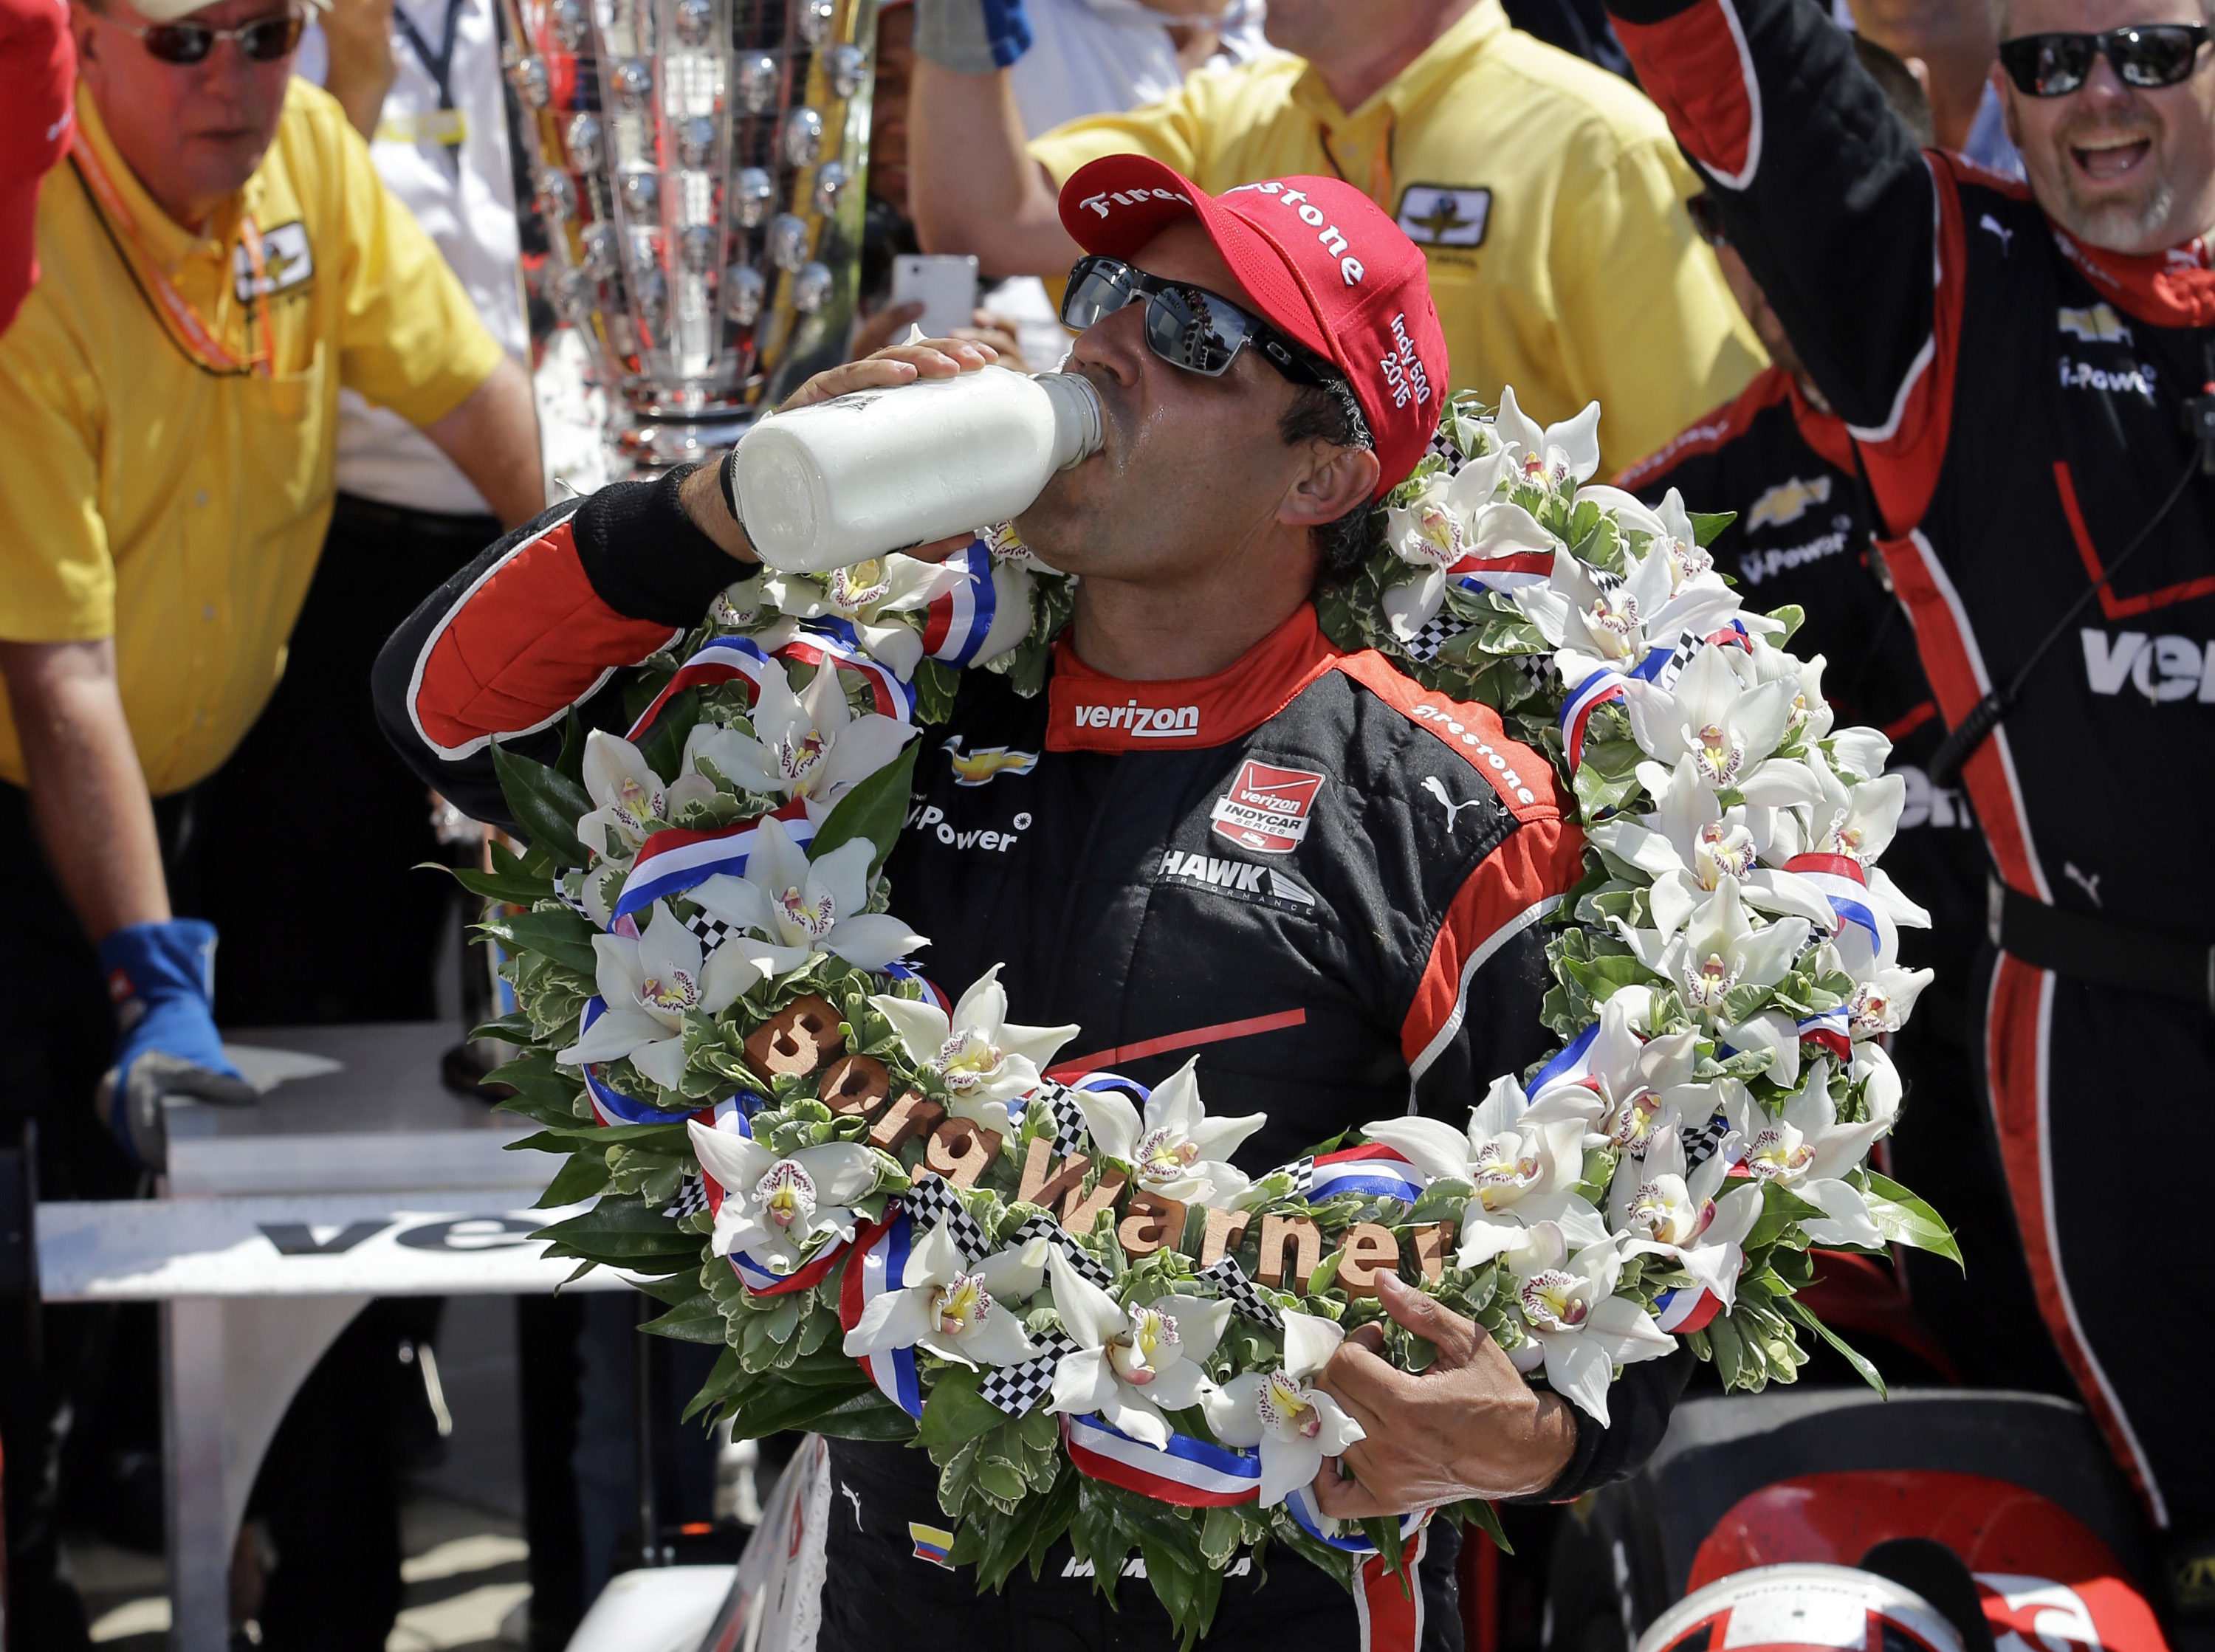 Juan Pablo Montoya celebrates after winning the 99th running of the Indianapolis 500. (AP)